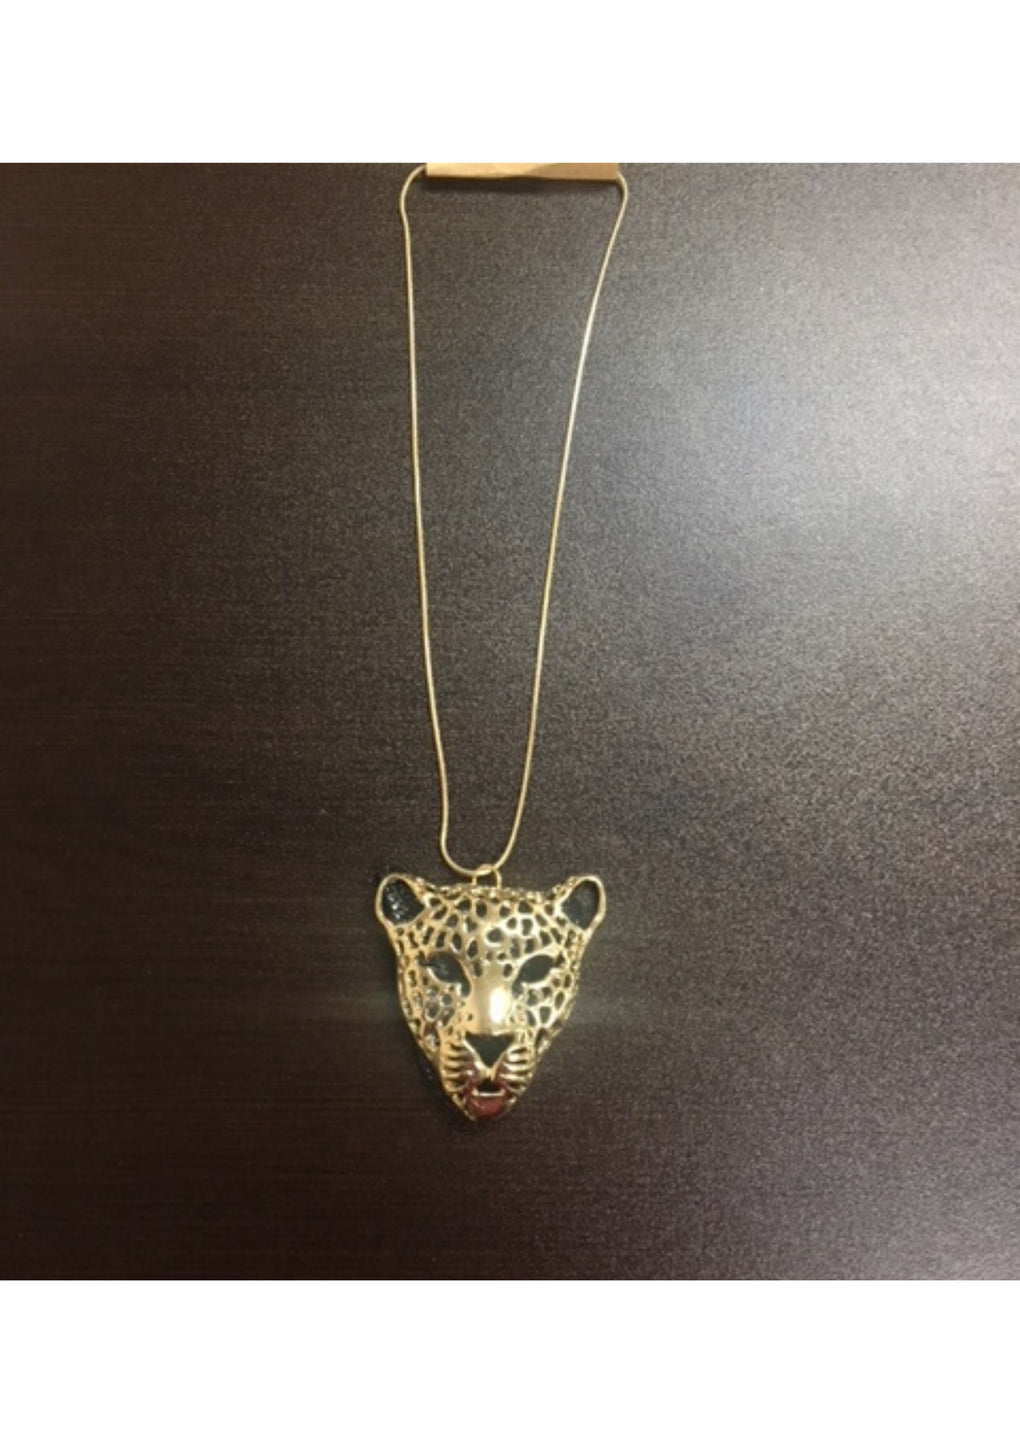 Chain with Panther Pendant Necklace